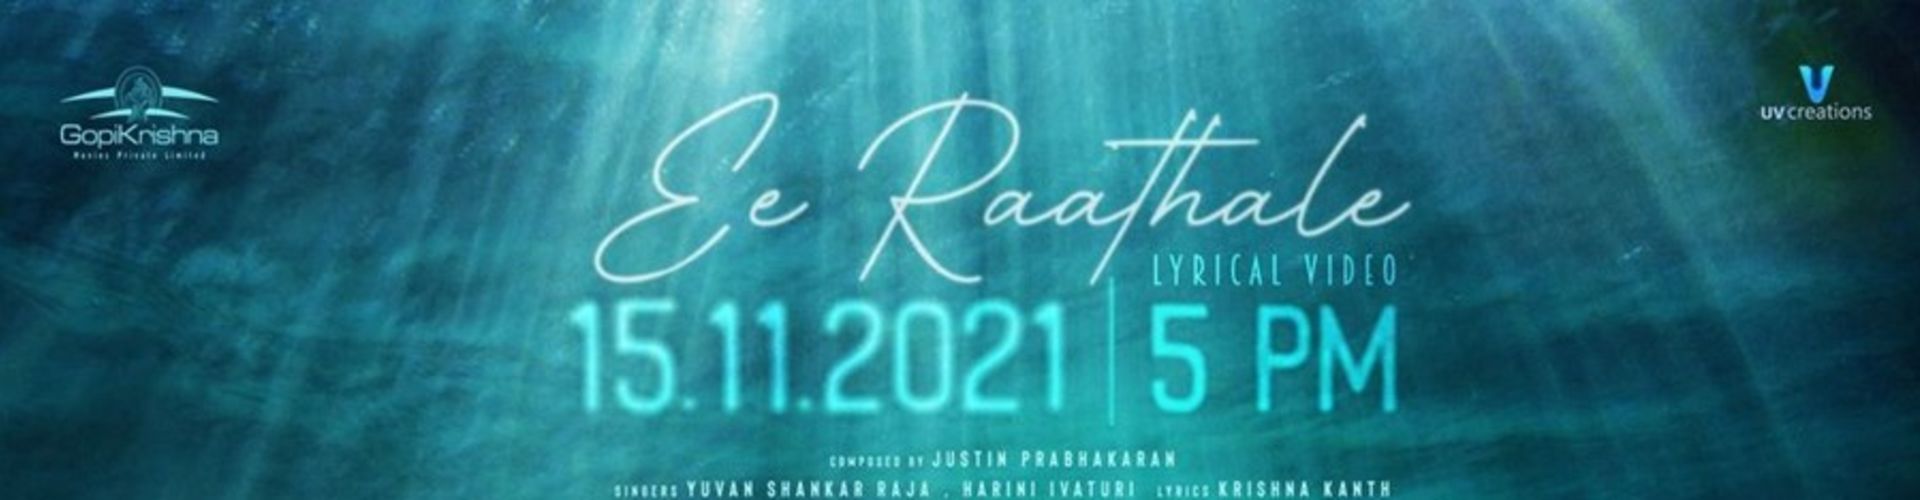 Prabhas Confirms The First Song From Radhe Shyam, Unveils First Look Poster